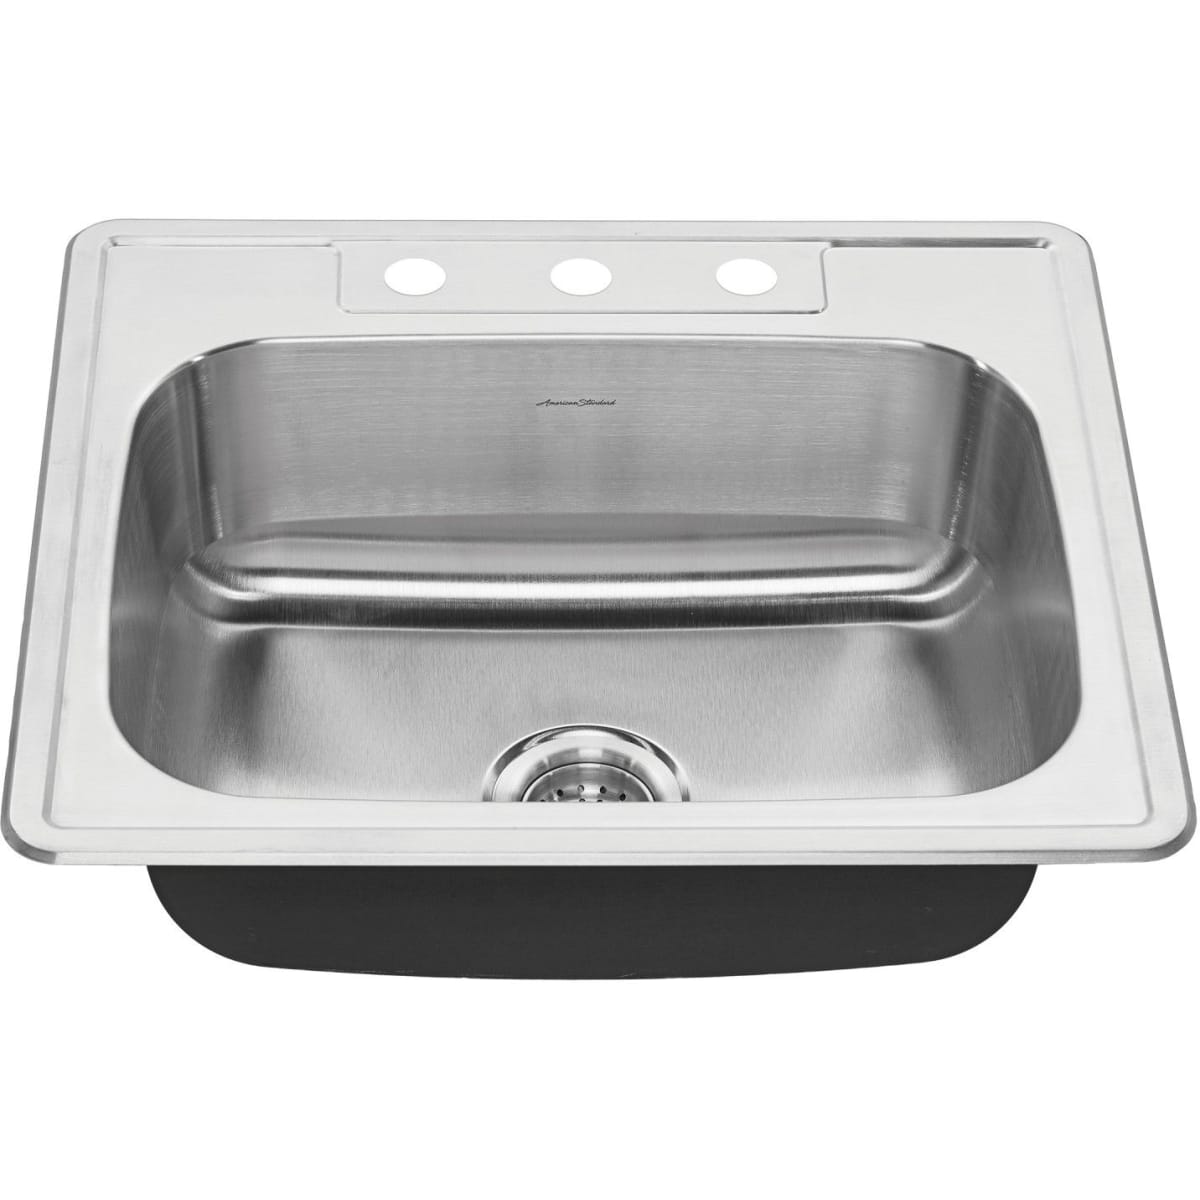 American Standard Kitchen Sink Drain with Strainer in Stainless Steel